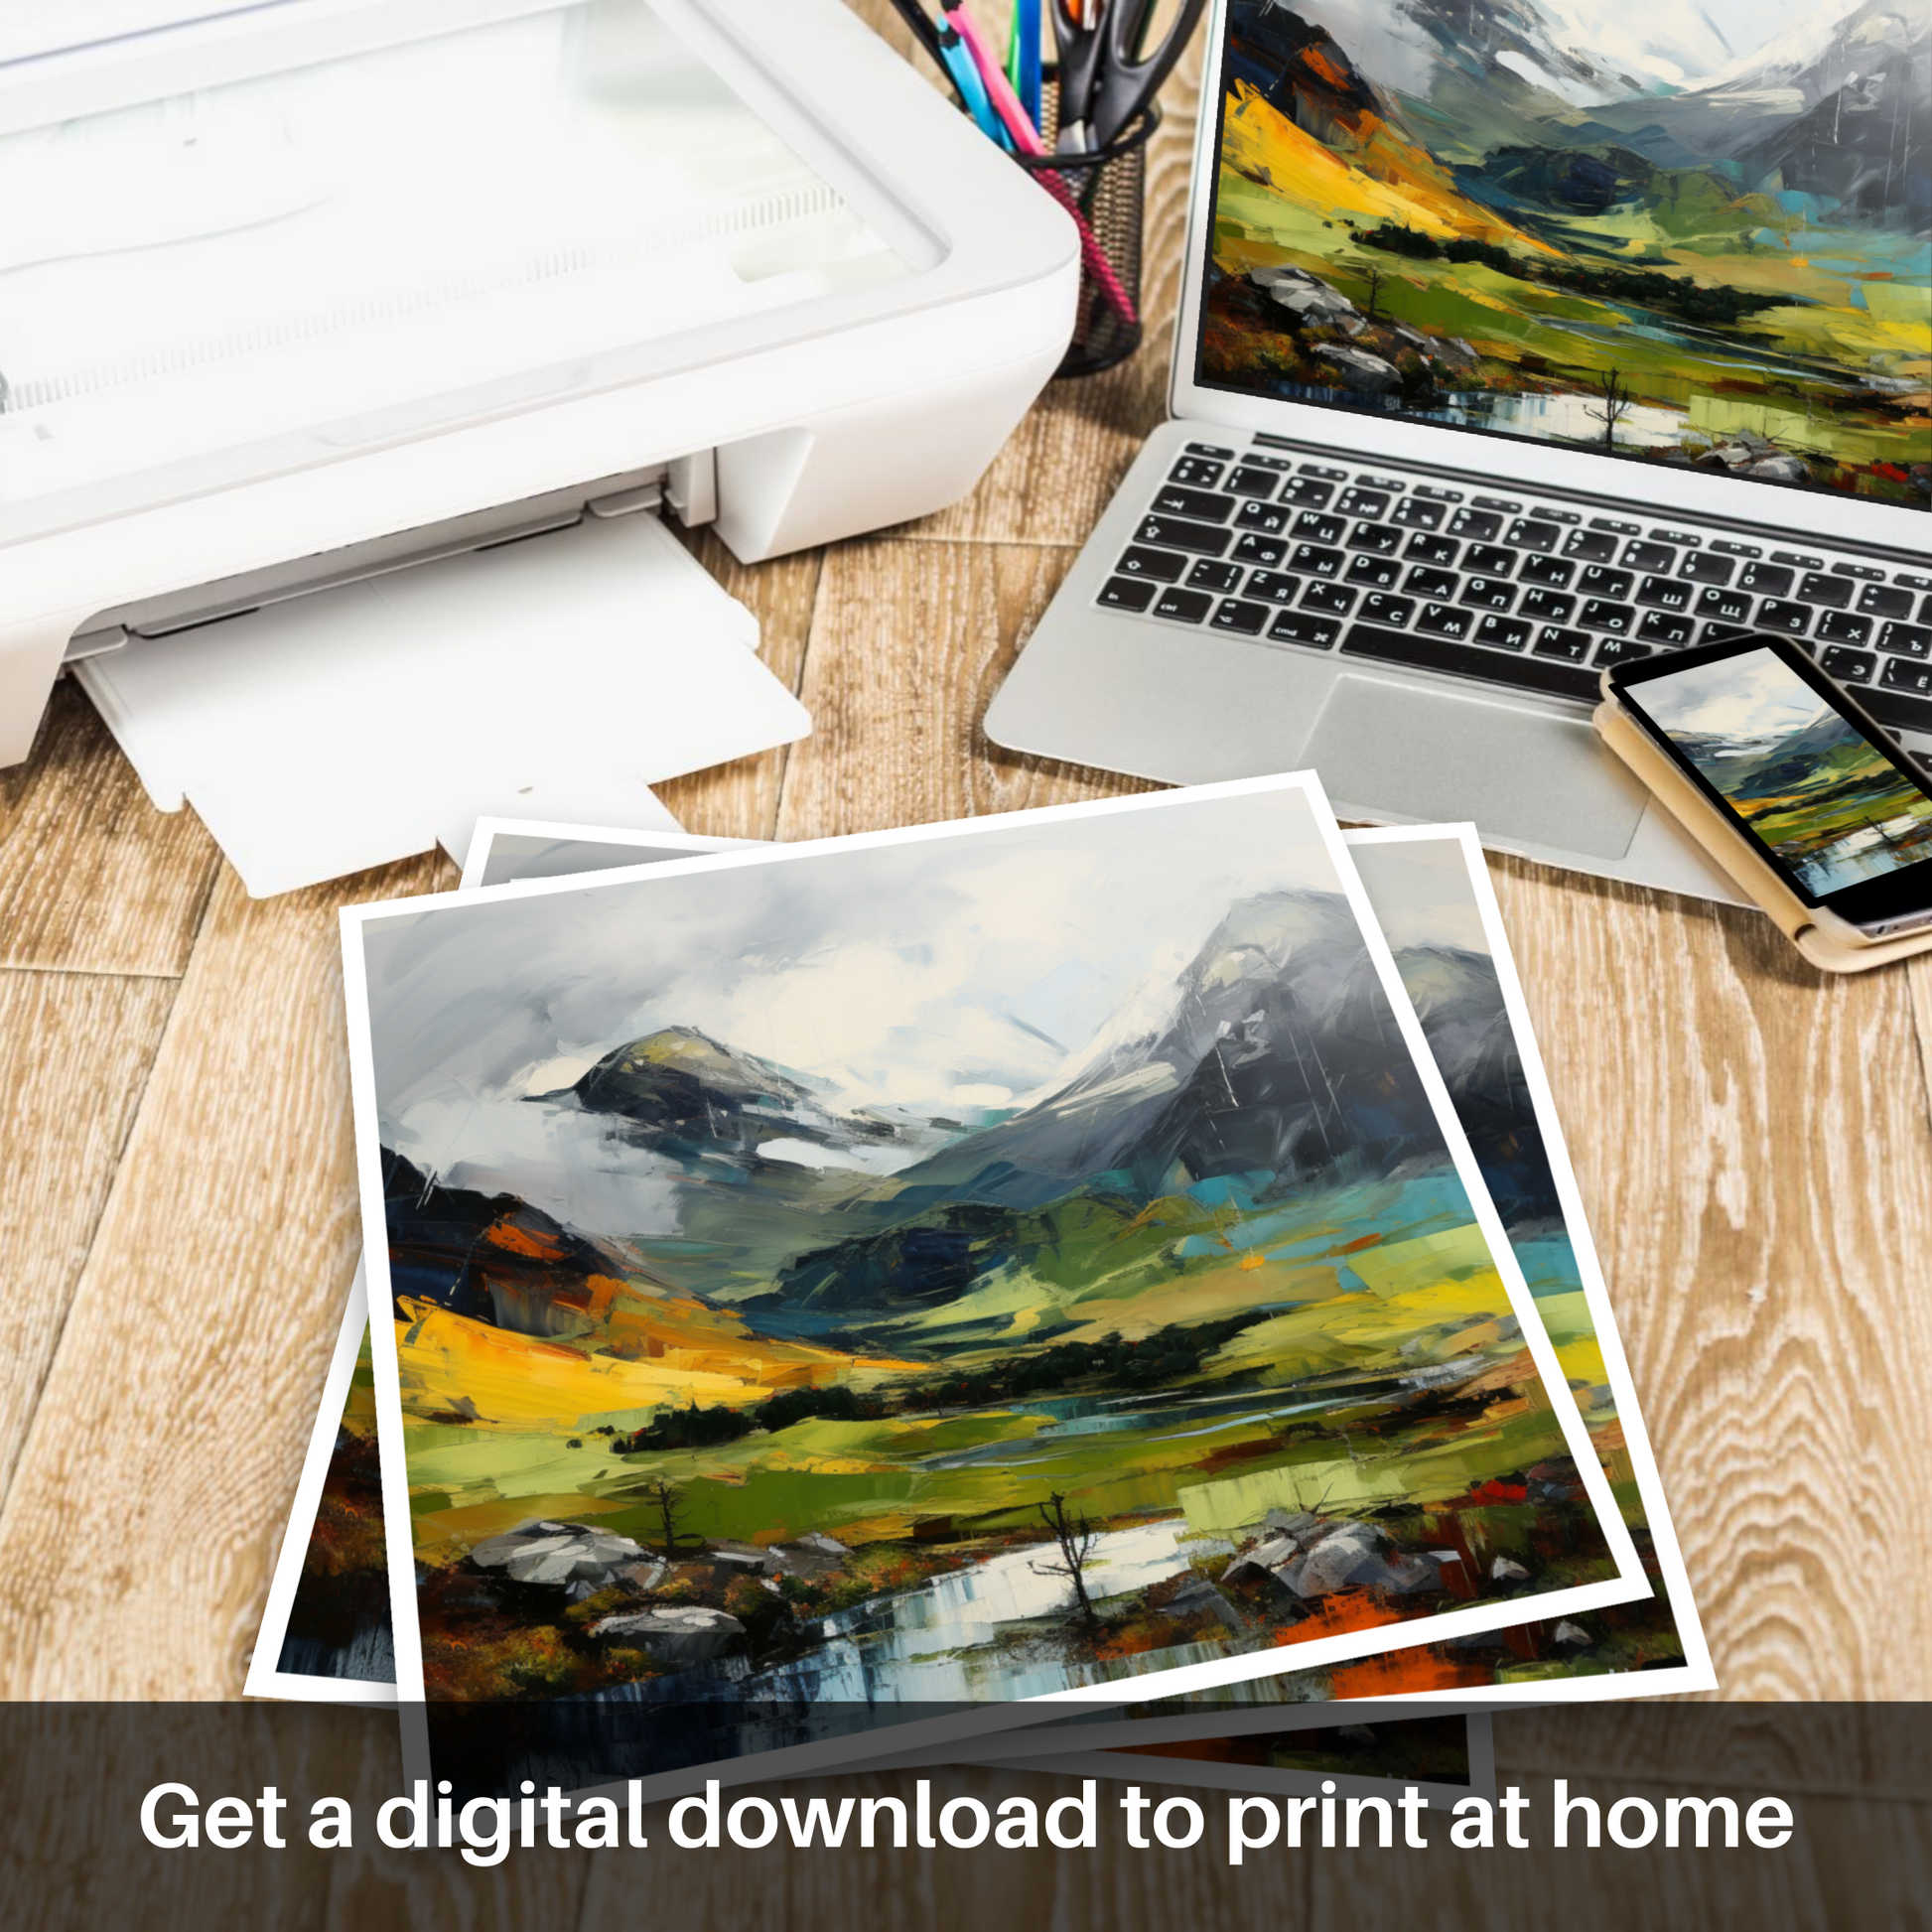 Downloadable and printable picture of Meall Greigh